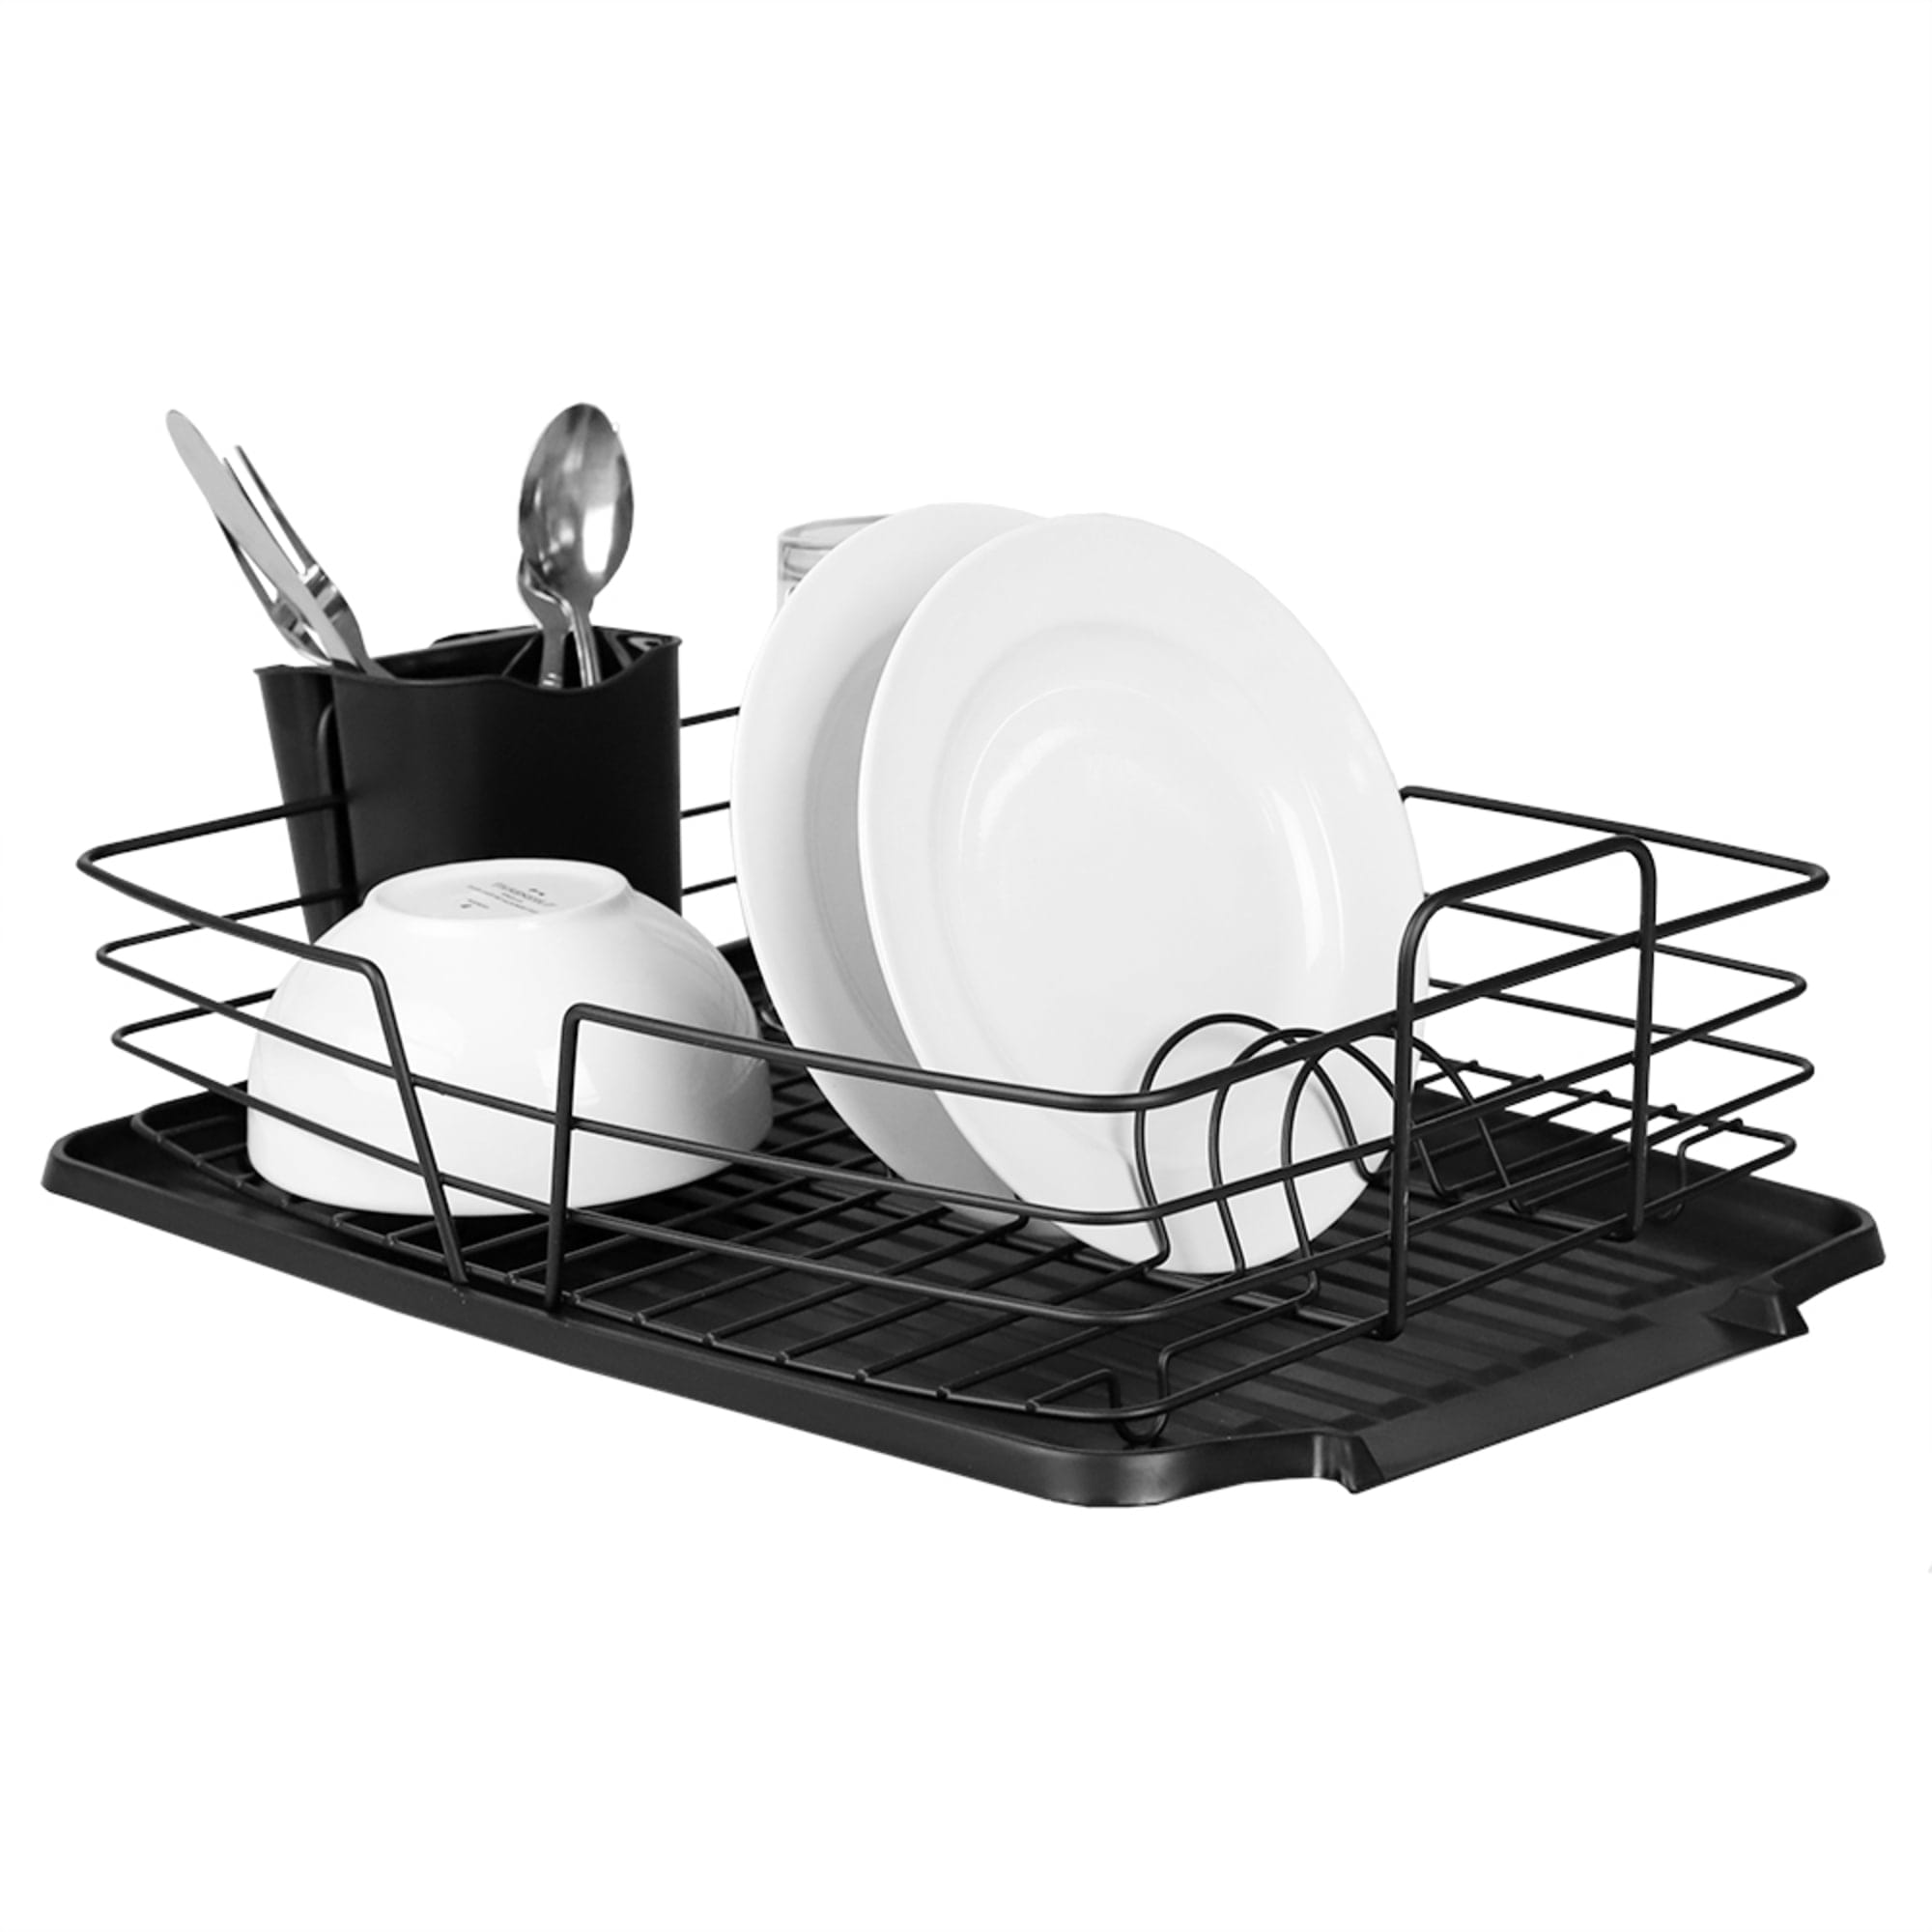 Dish Drying Rack Detachable 2 Tier Dish Rack with Drainboard - Silver, Black